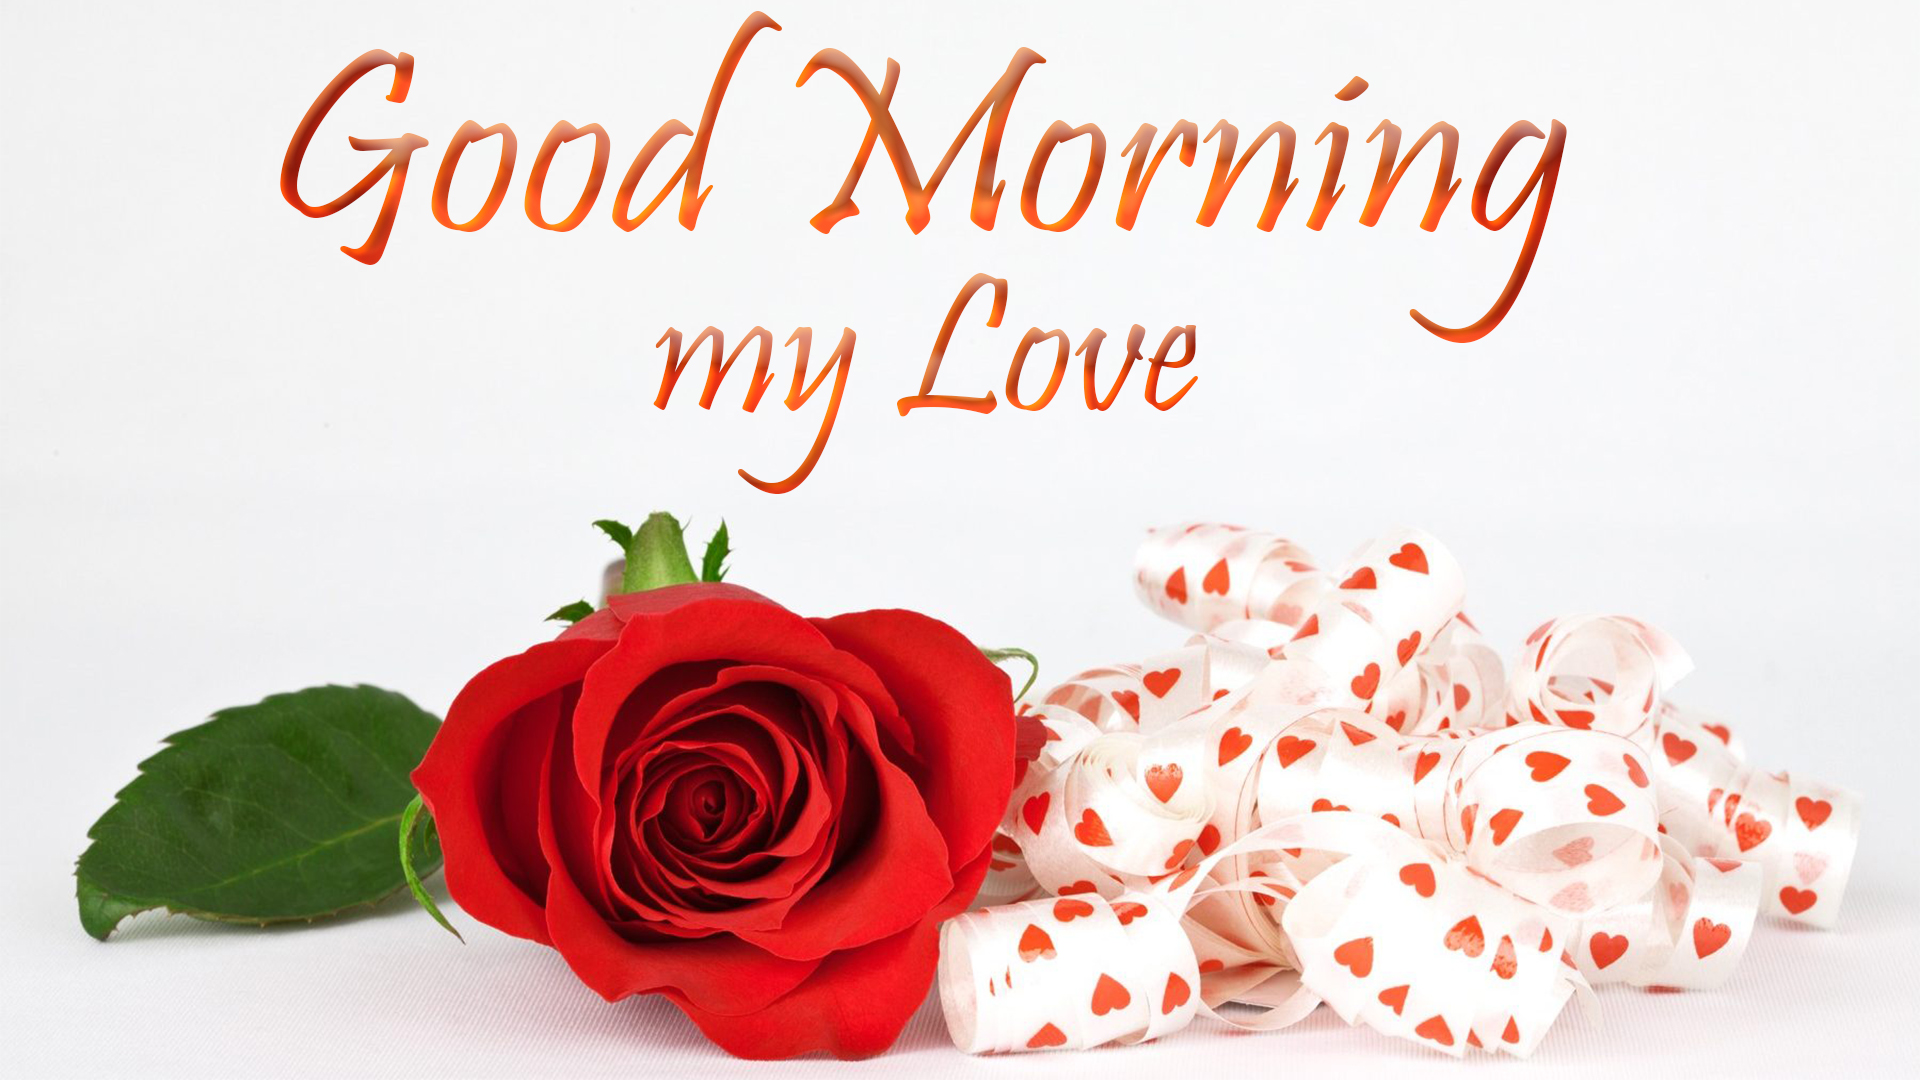 Good Morning My Love Images & HD Pictures Morning Wishes